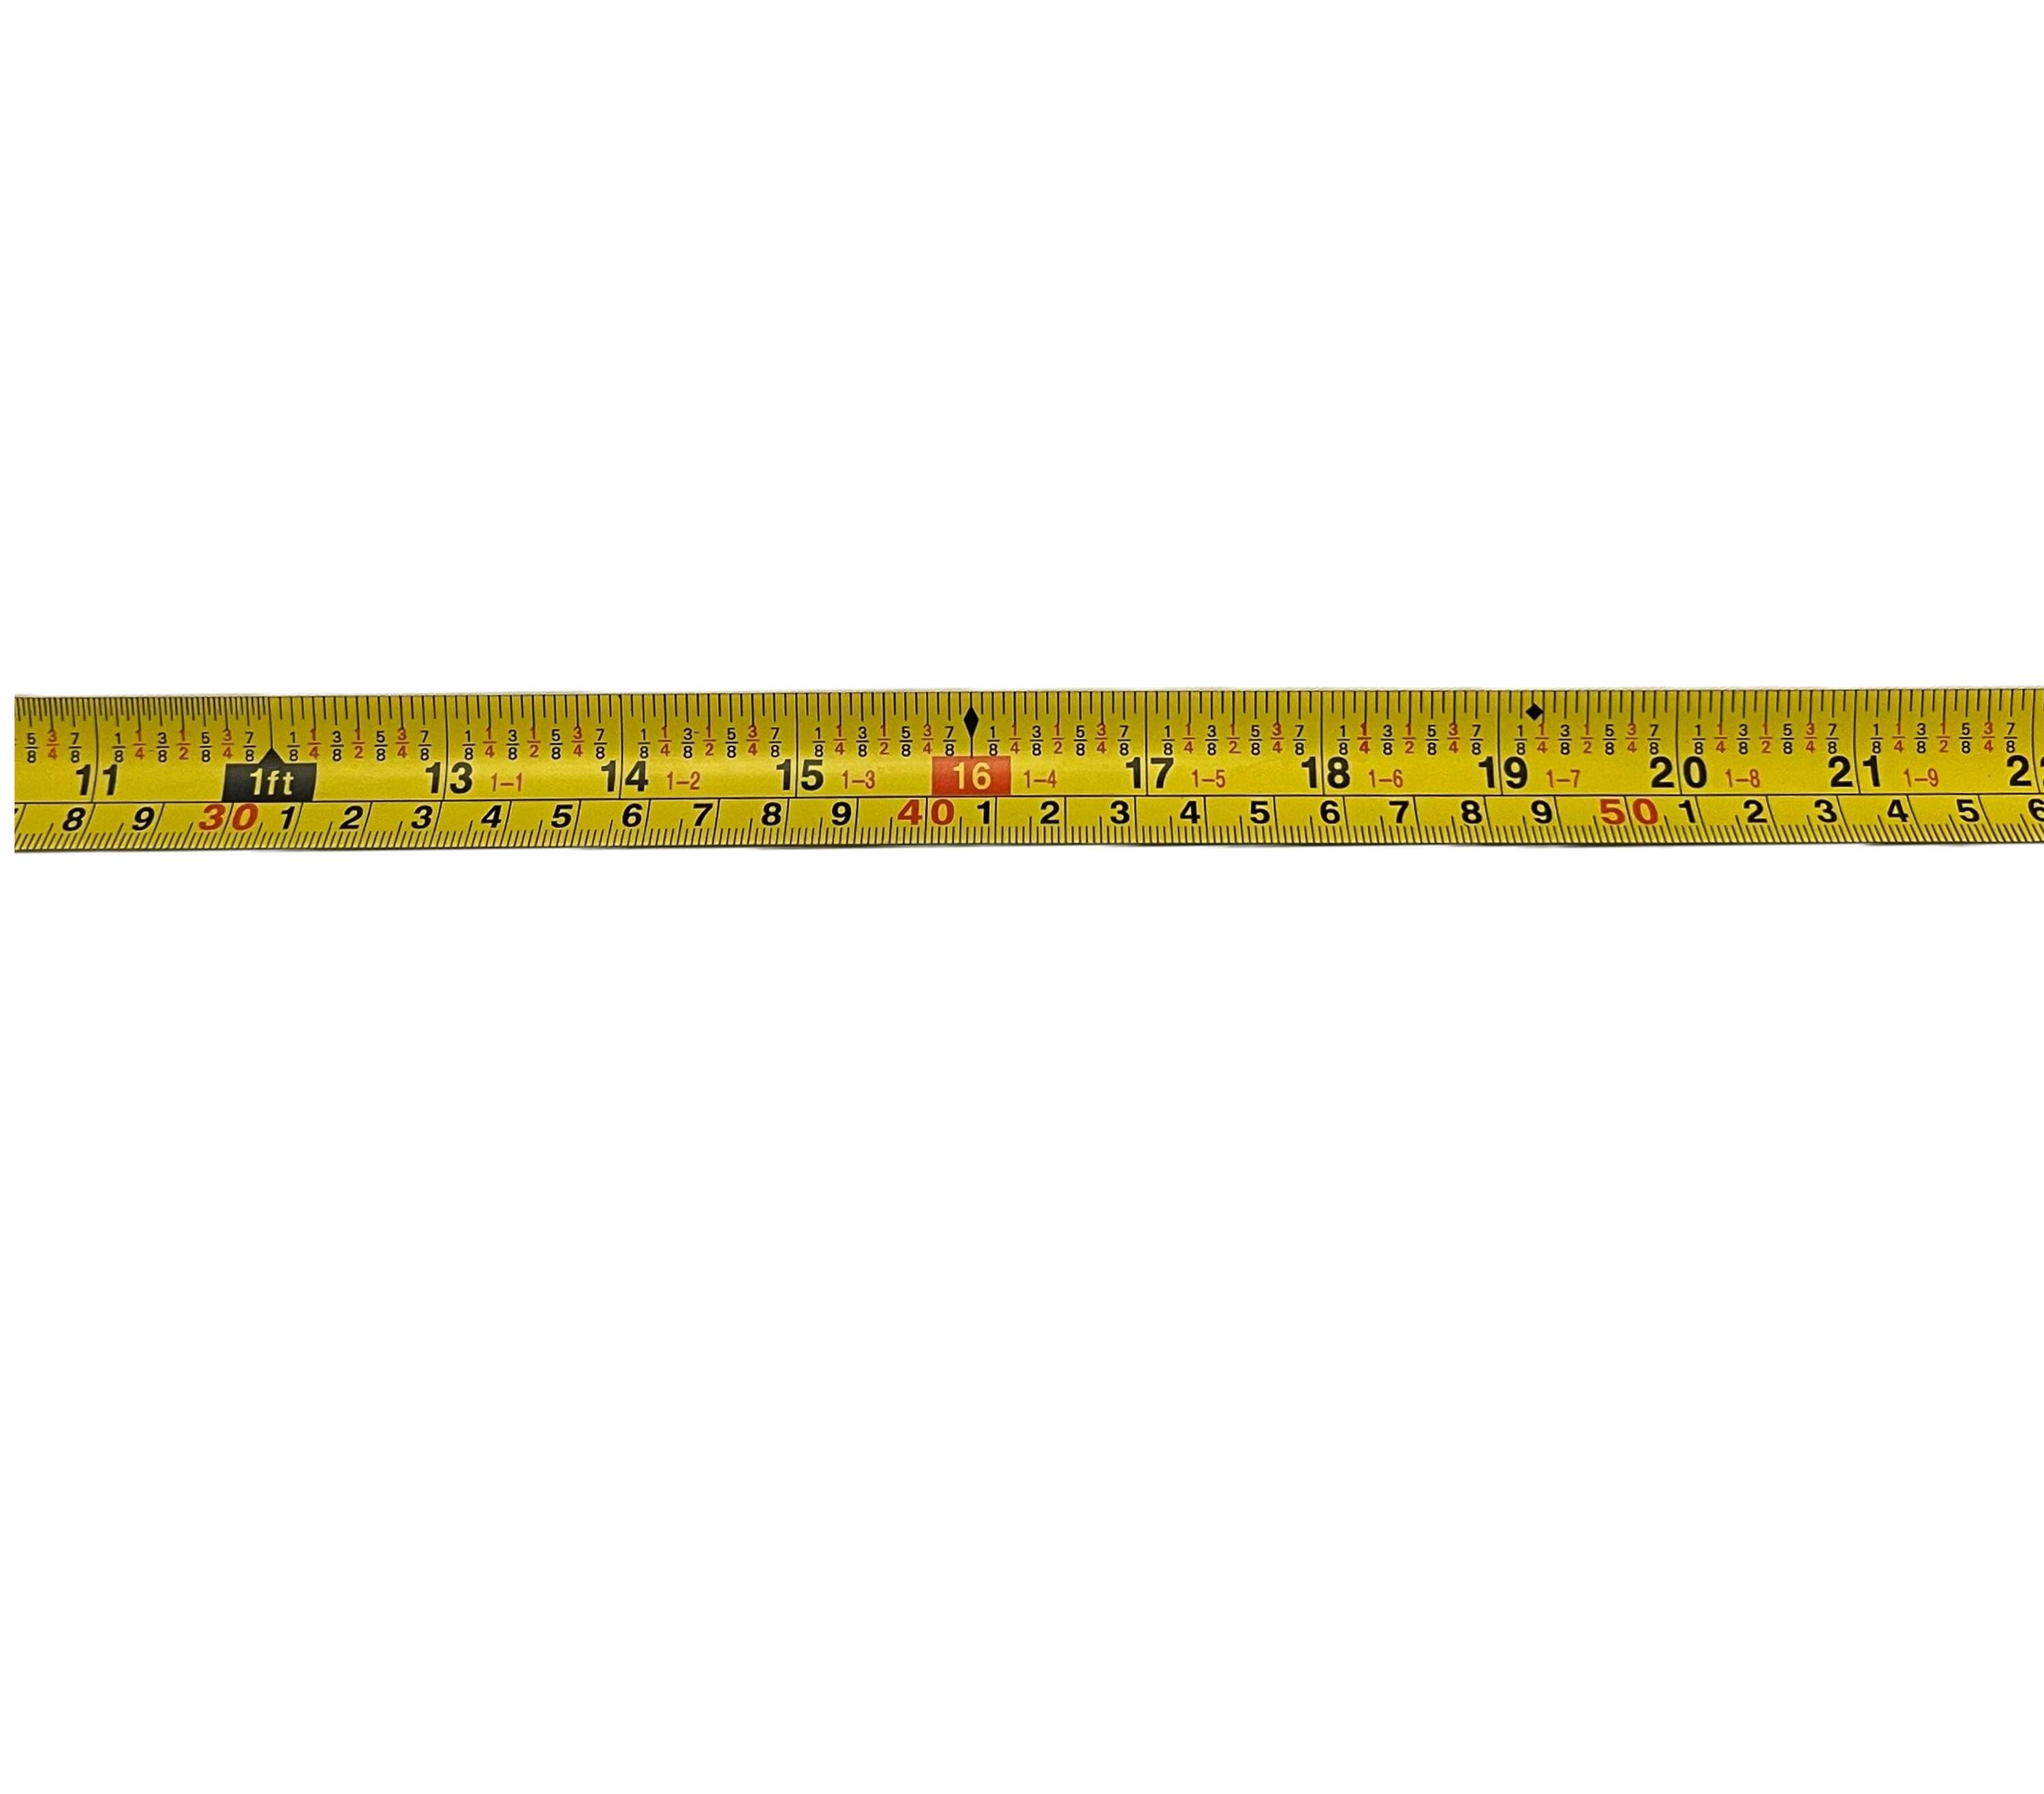 Apollo Tools Dt5002p 25ft. Tape Measure Pink